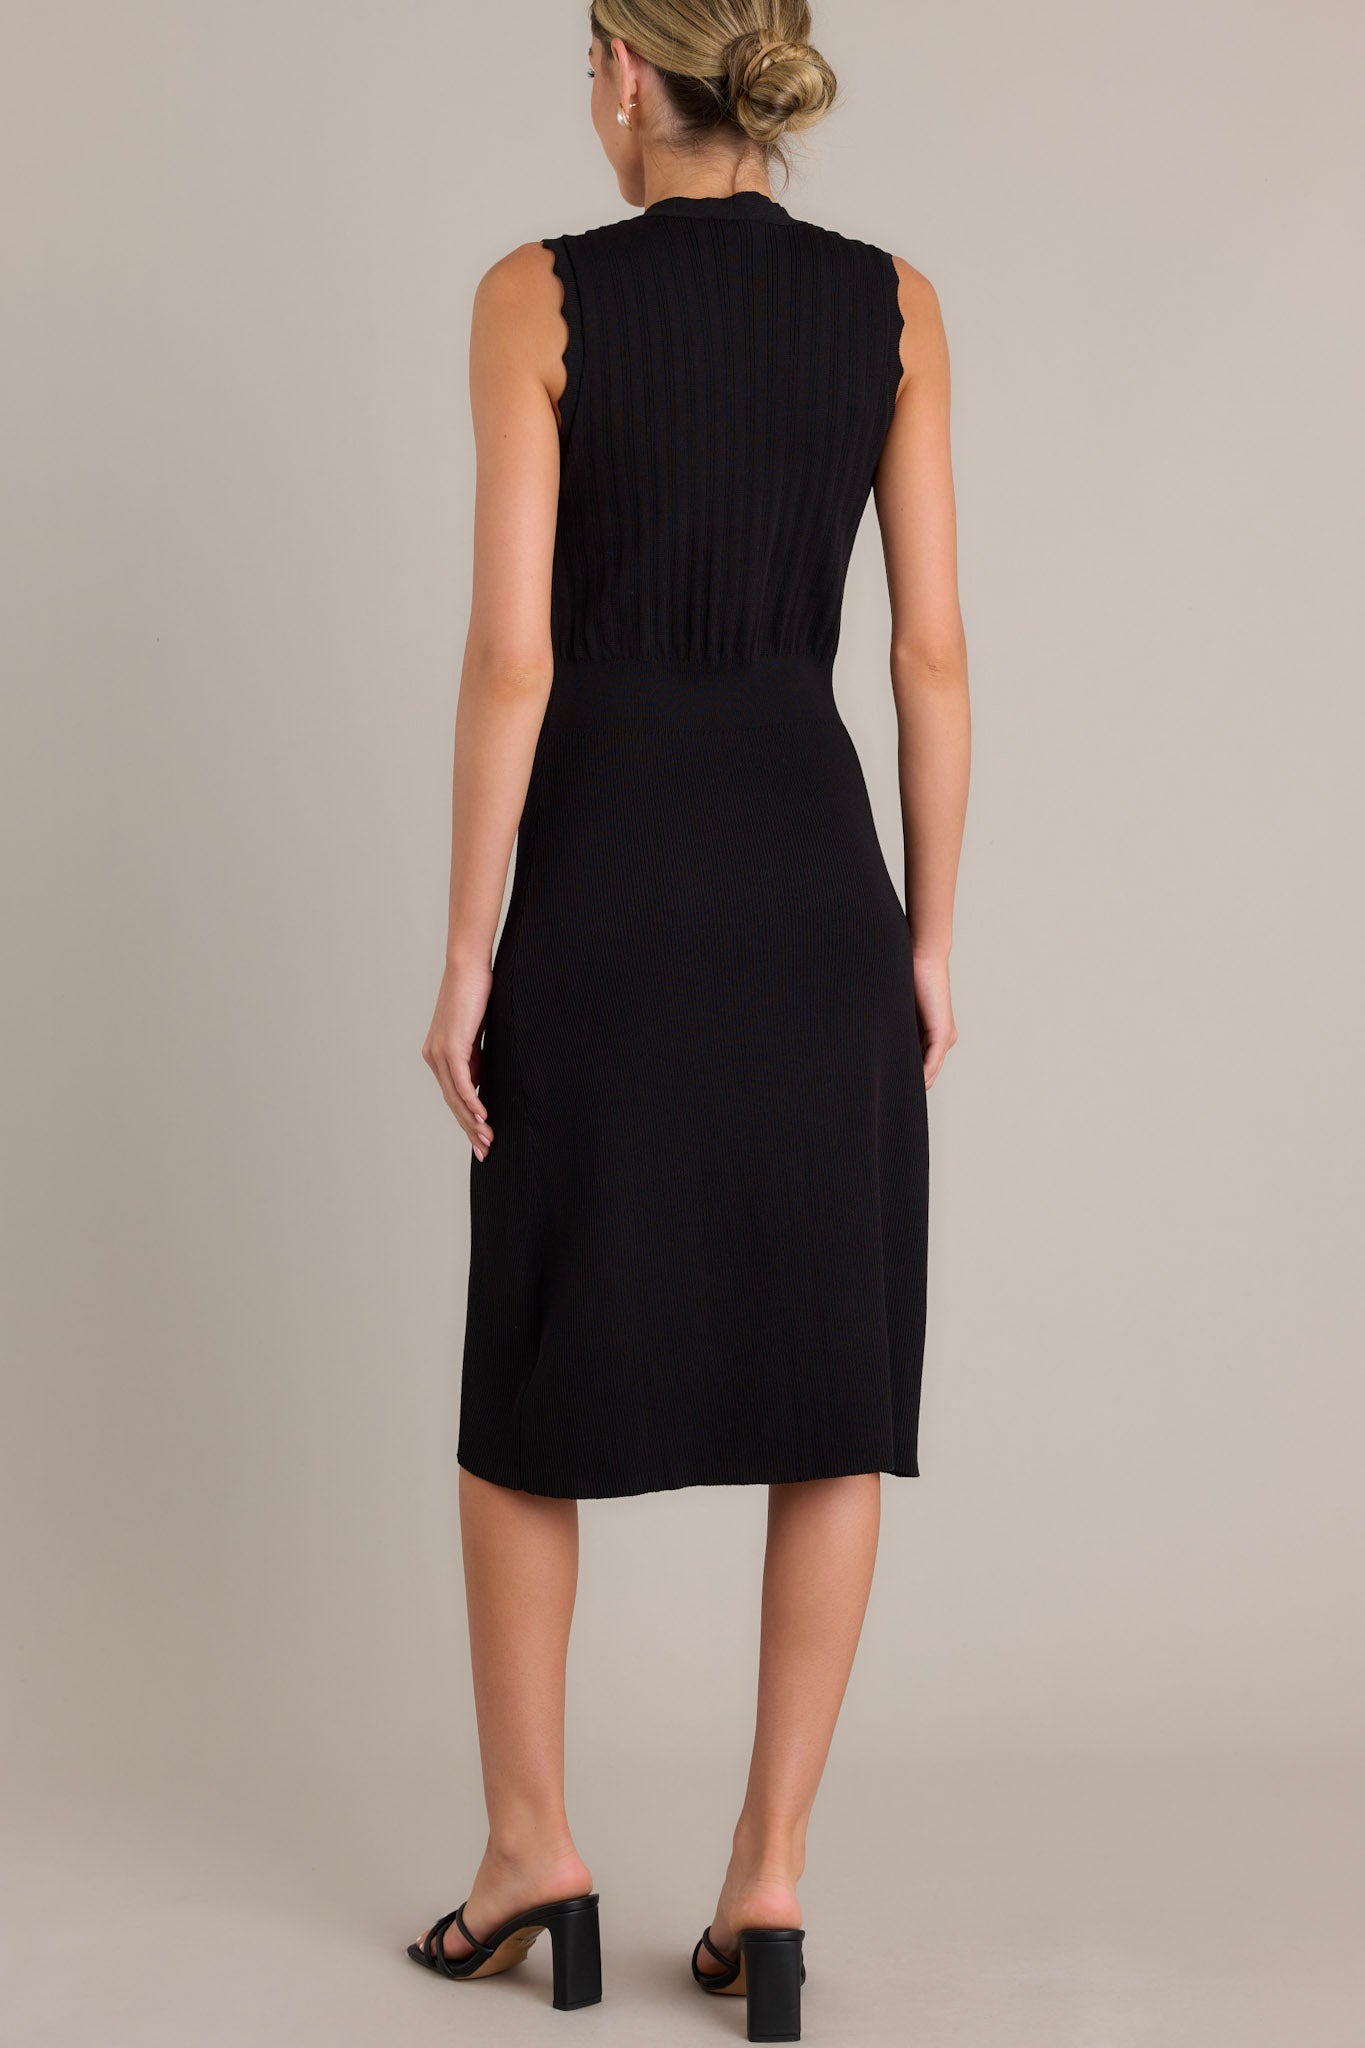 Back view of a black dress highlighting the overall fit and the scalloped sleeves.